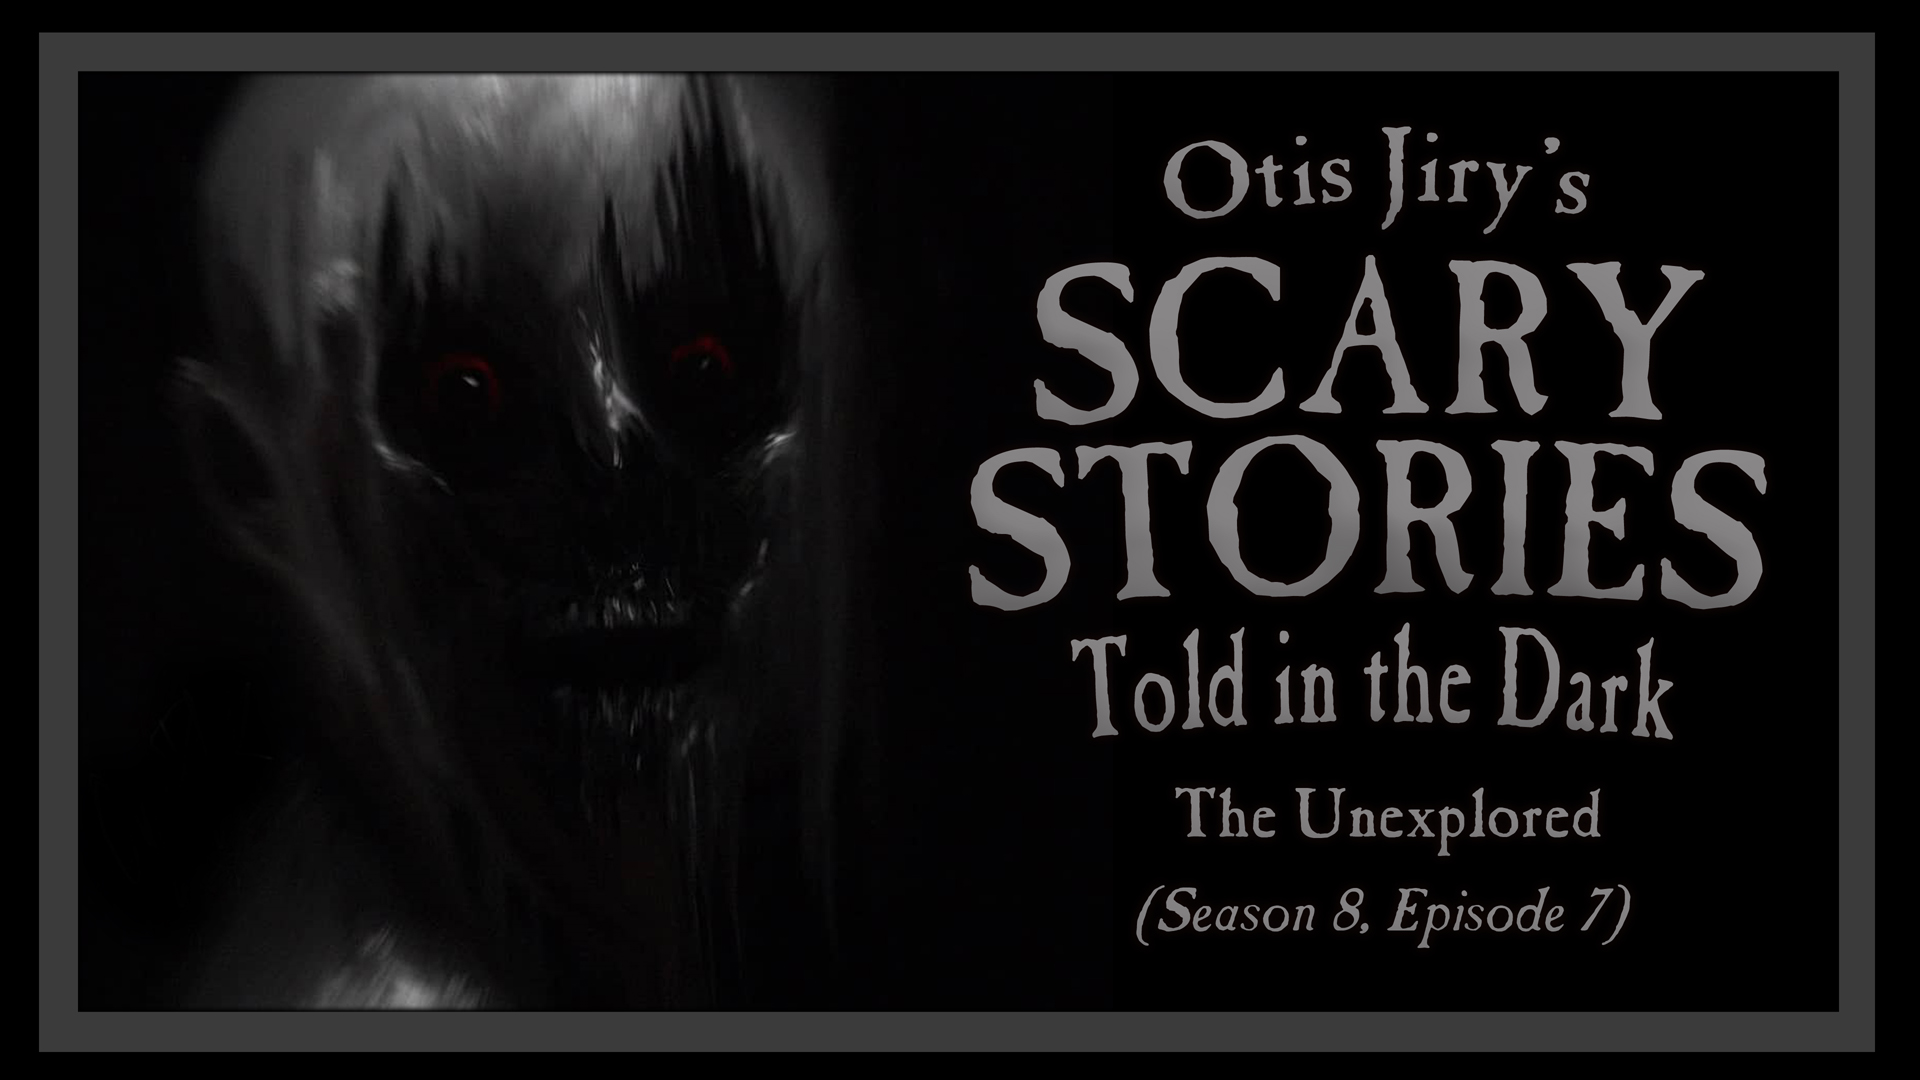 Scary stories in the dark. Scary stories to tell in the Dark pale Lady арт. Scary story на английском. Scary stories to tell in the Dark Гарольд.